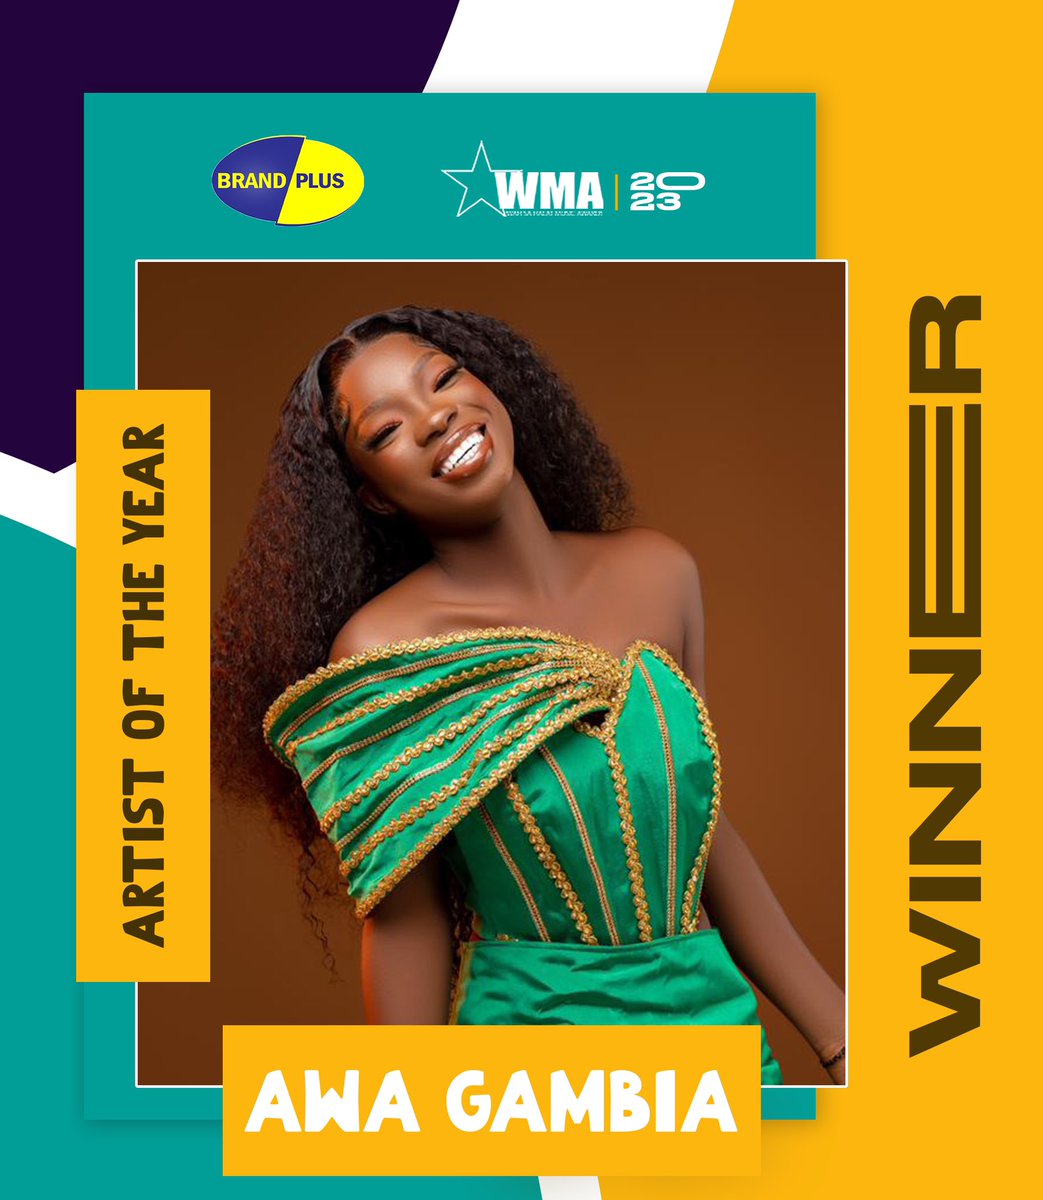 AWA GAMBIA IS ARTIST OF THE YEAR 🔥🥳🥳

The Artist of the year for 2022 is AWA GAMBIA 😍❤️ 
we appreciate your work and we celebrate you 🥳🥳🥳

Congratulations 🥳🥳🥳🥳🔥❤️
#wma #wma2023 #BiggerIsBetter #biggerandbetter